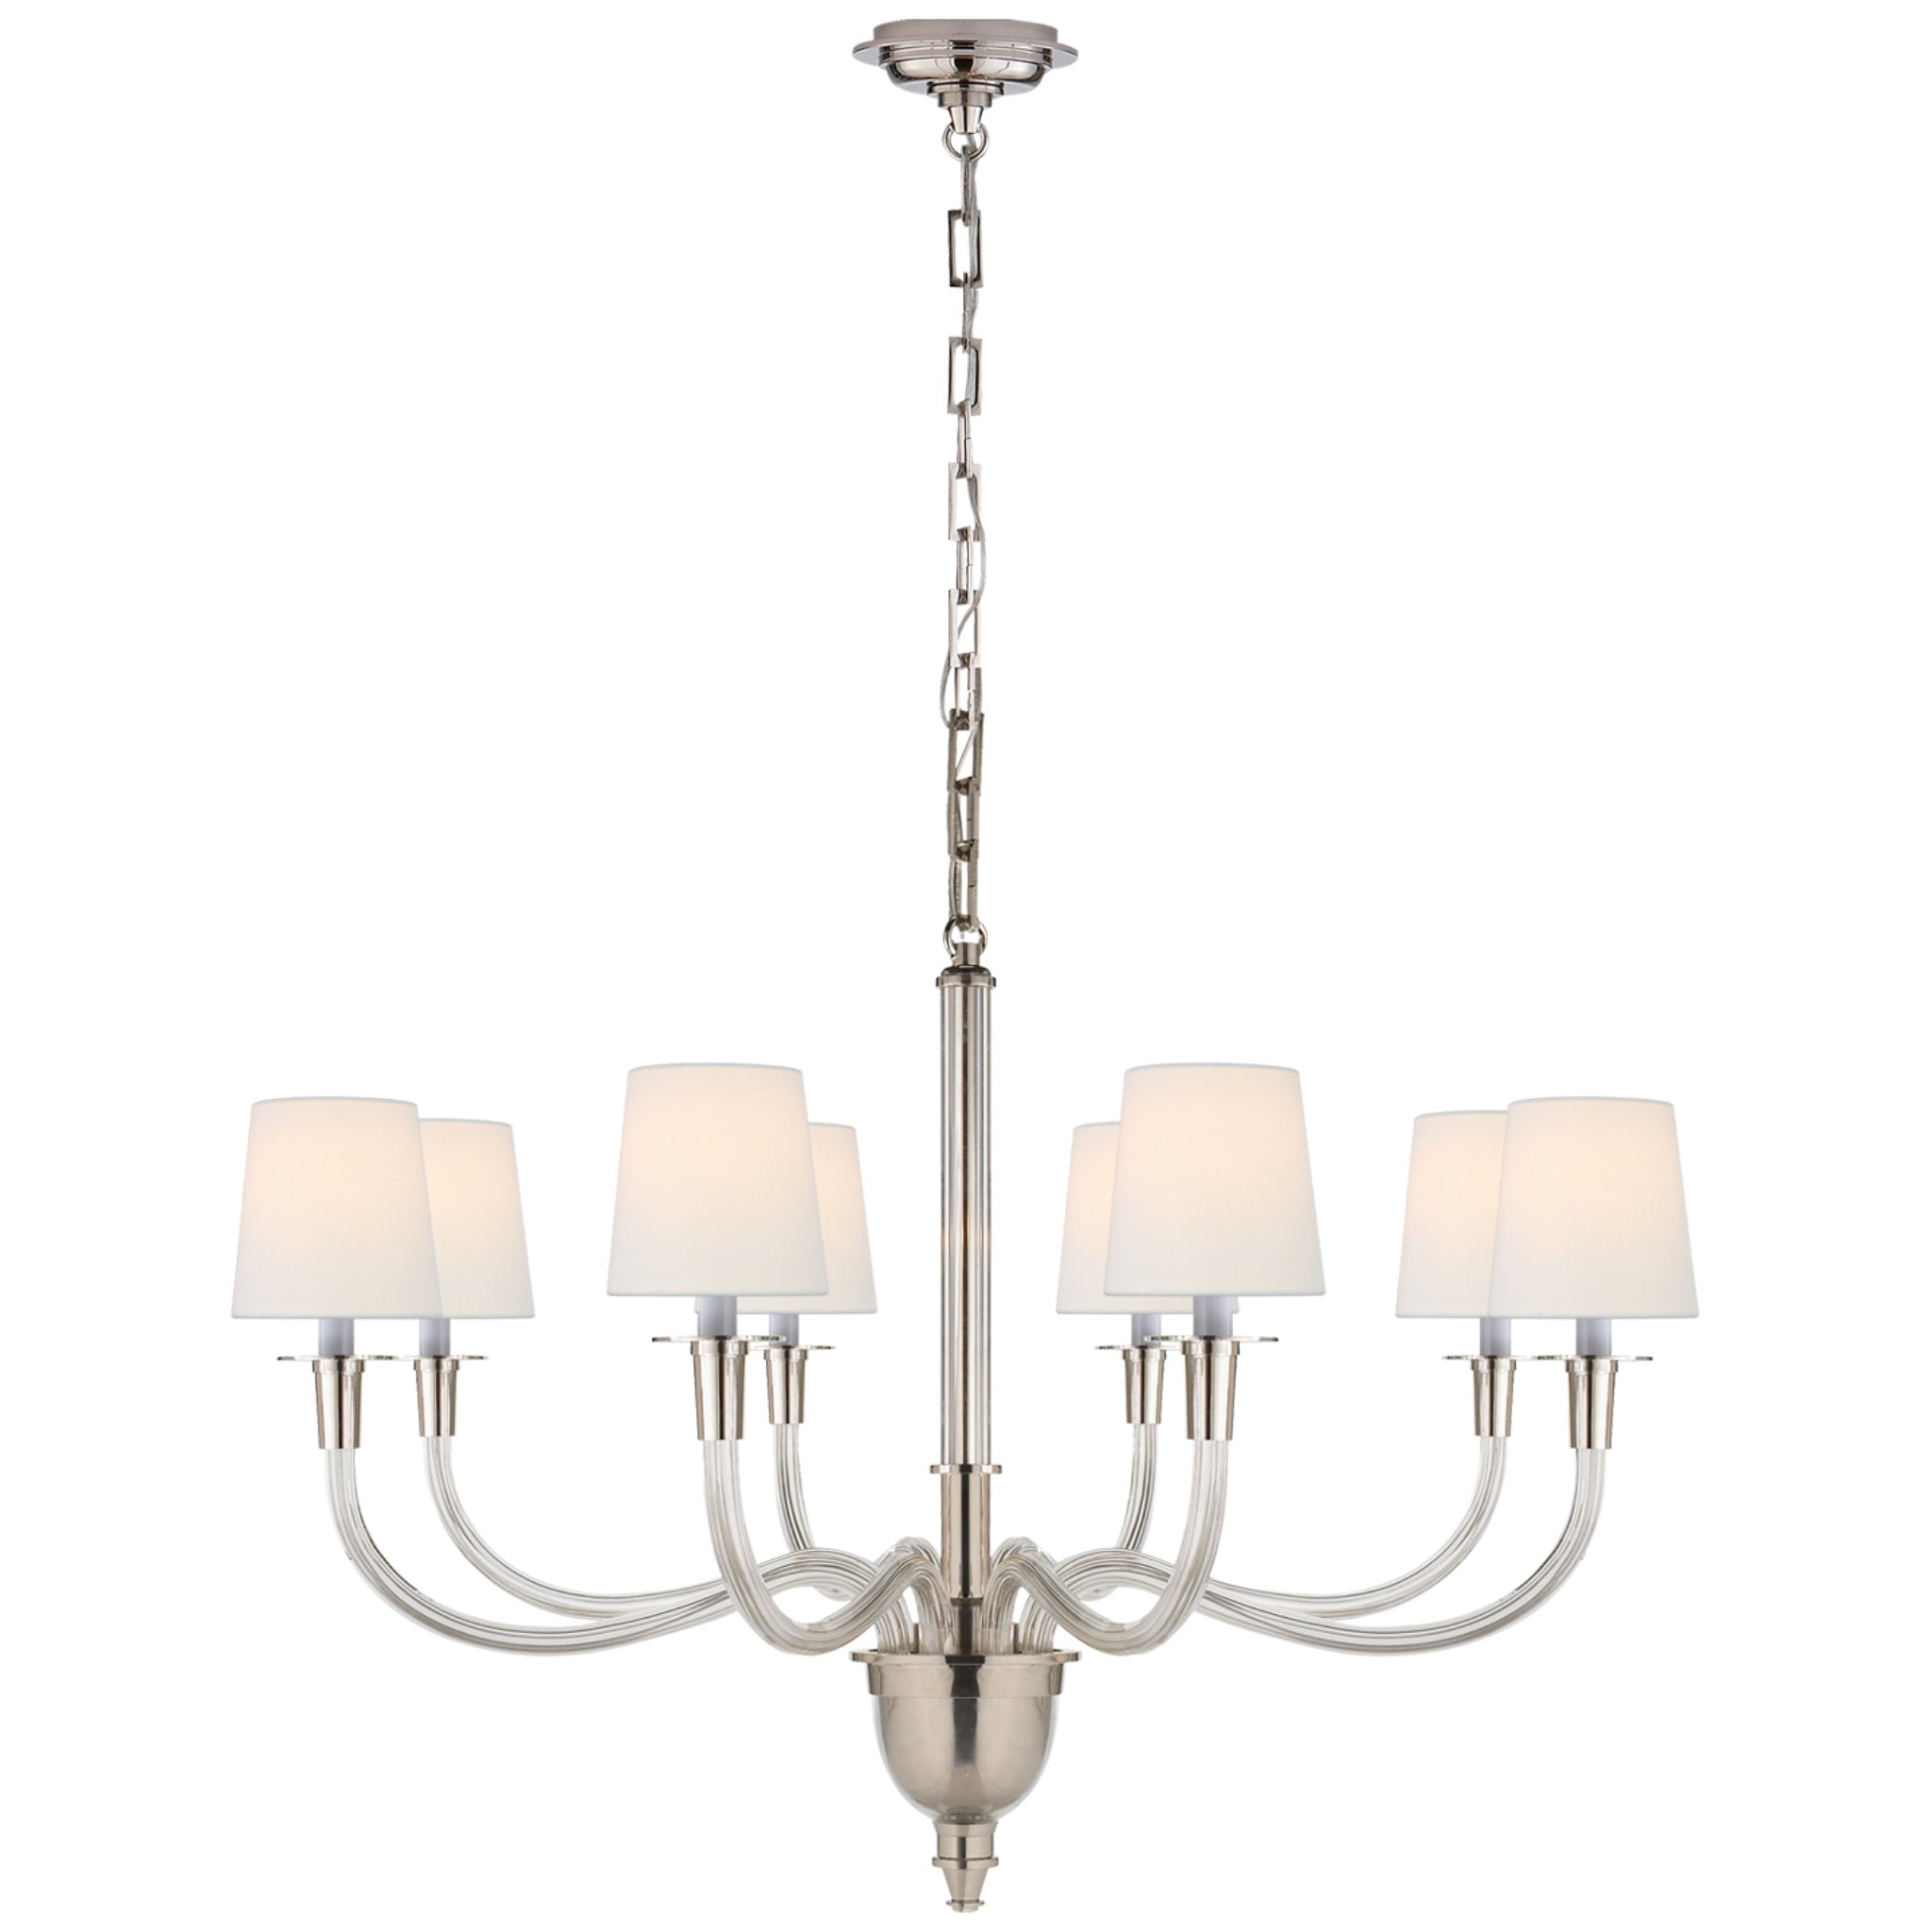 Thomas O'Brien Vivian Large One-Tier Chandelier in Polished Nickel with Linen Shades